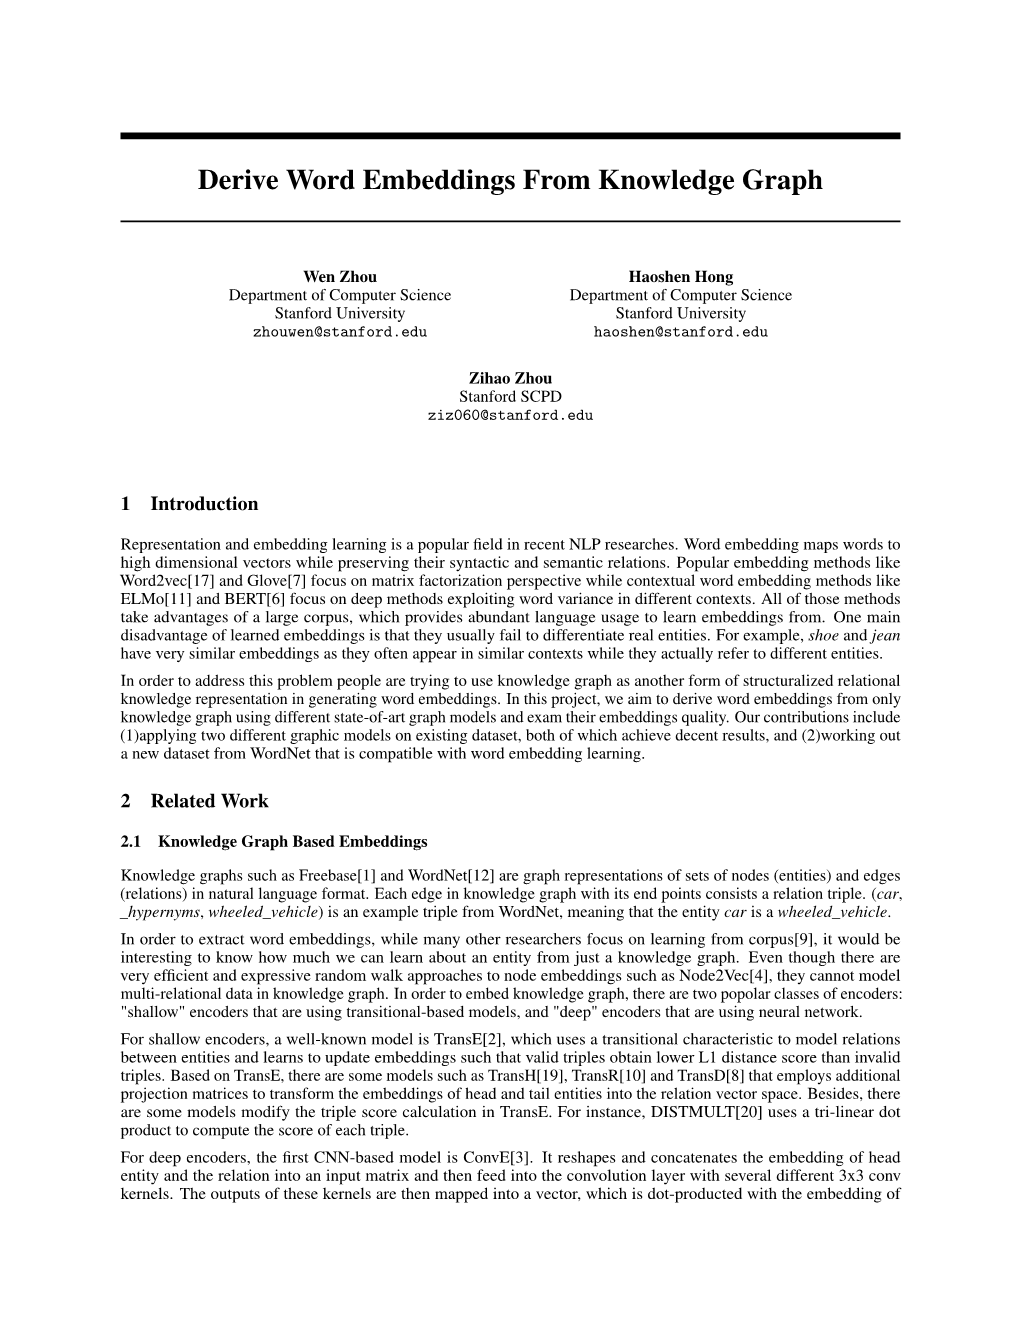 Derive Word Embeddings from Knowledge Graph